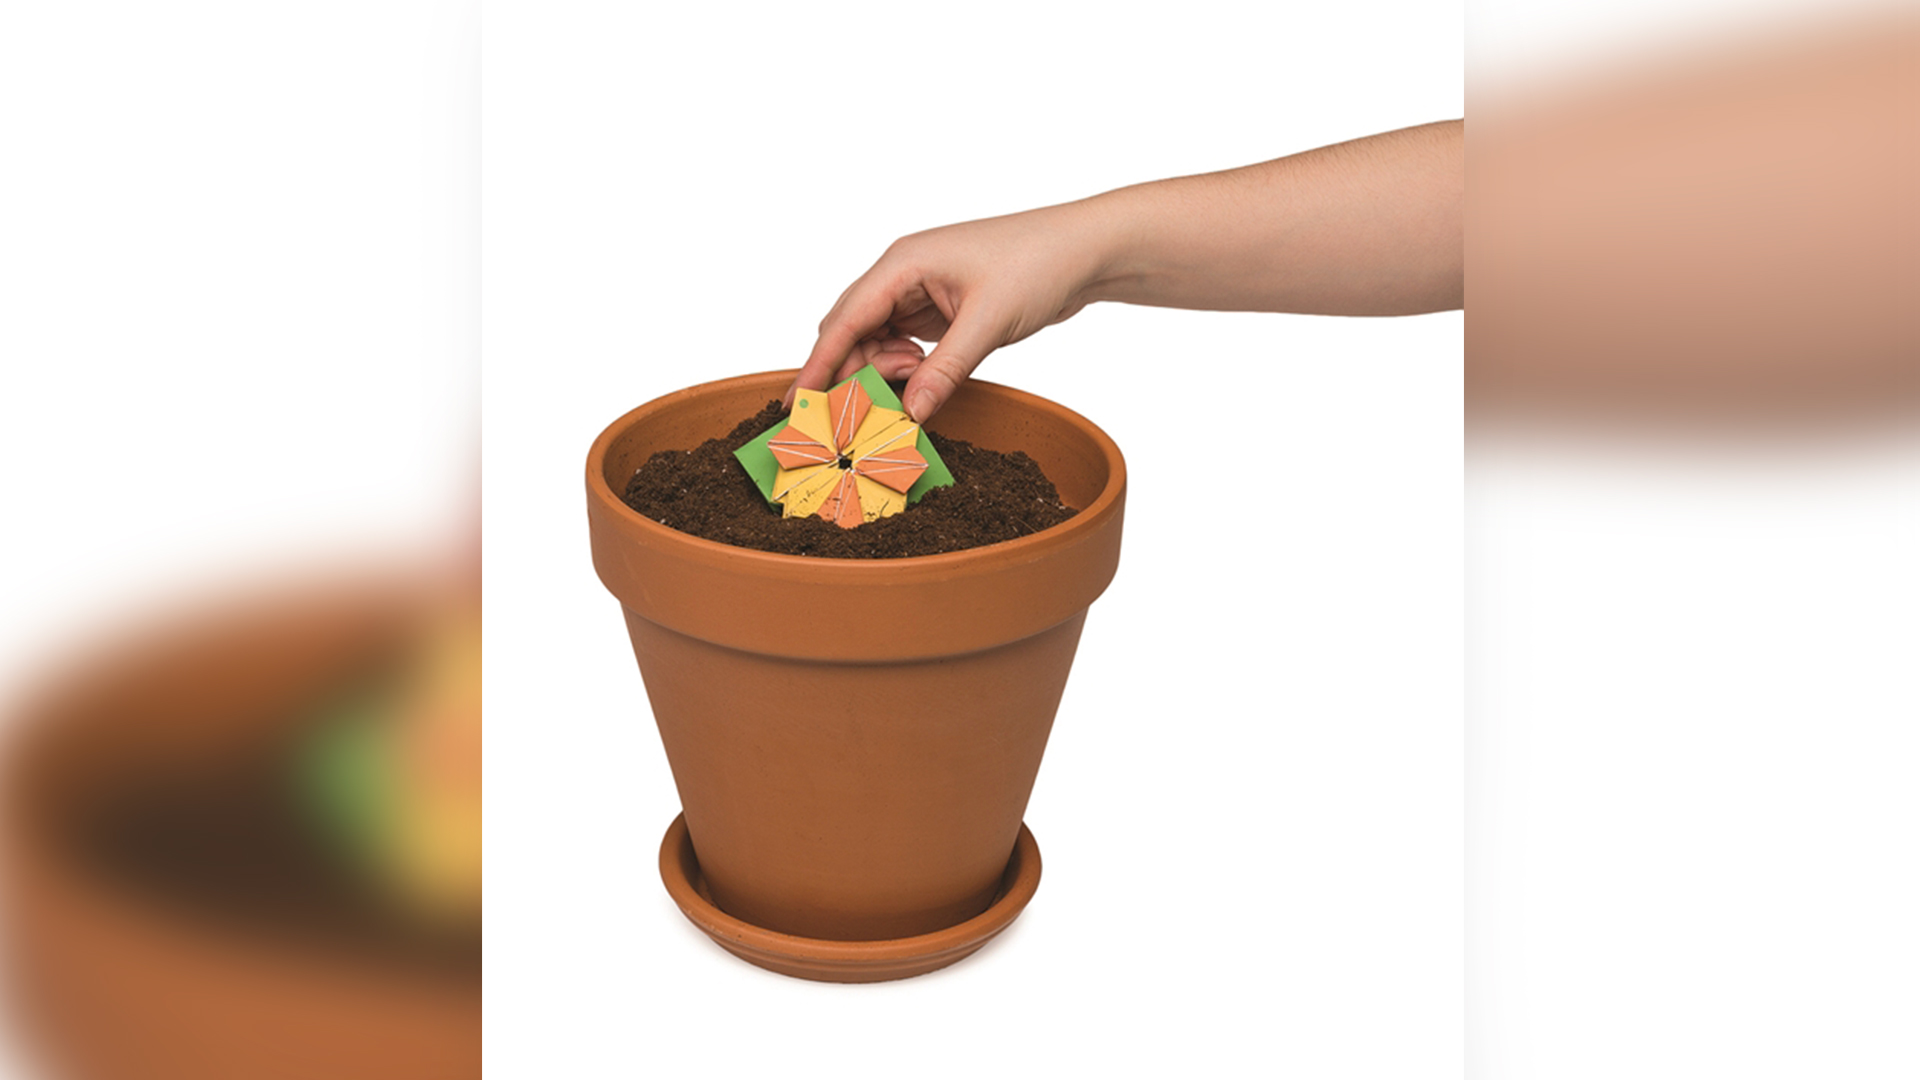 Someone placing origami seed packet in soil of flower pot